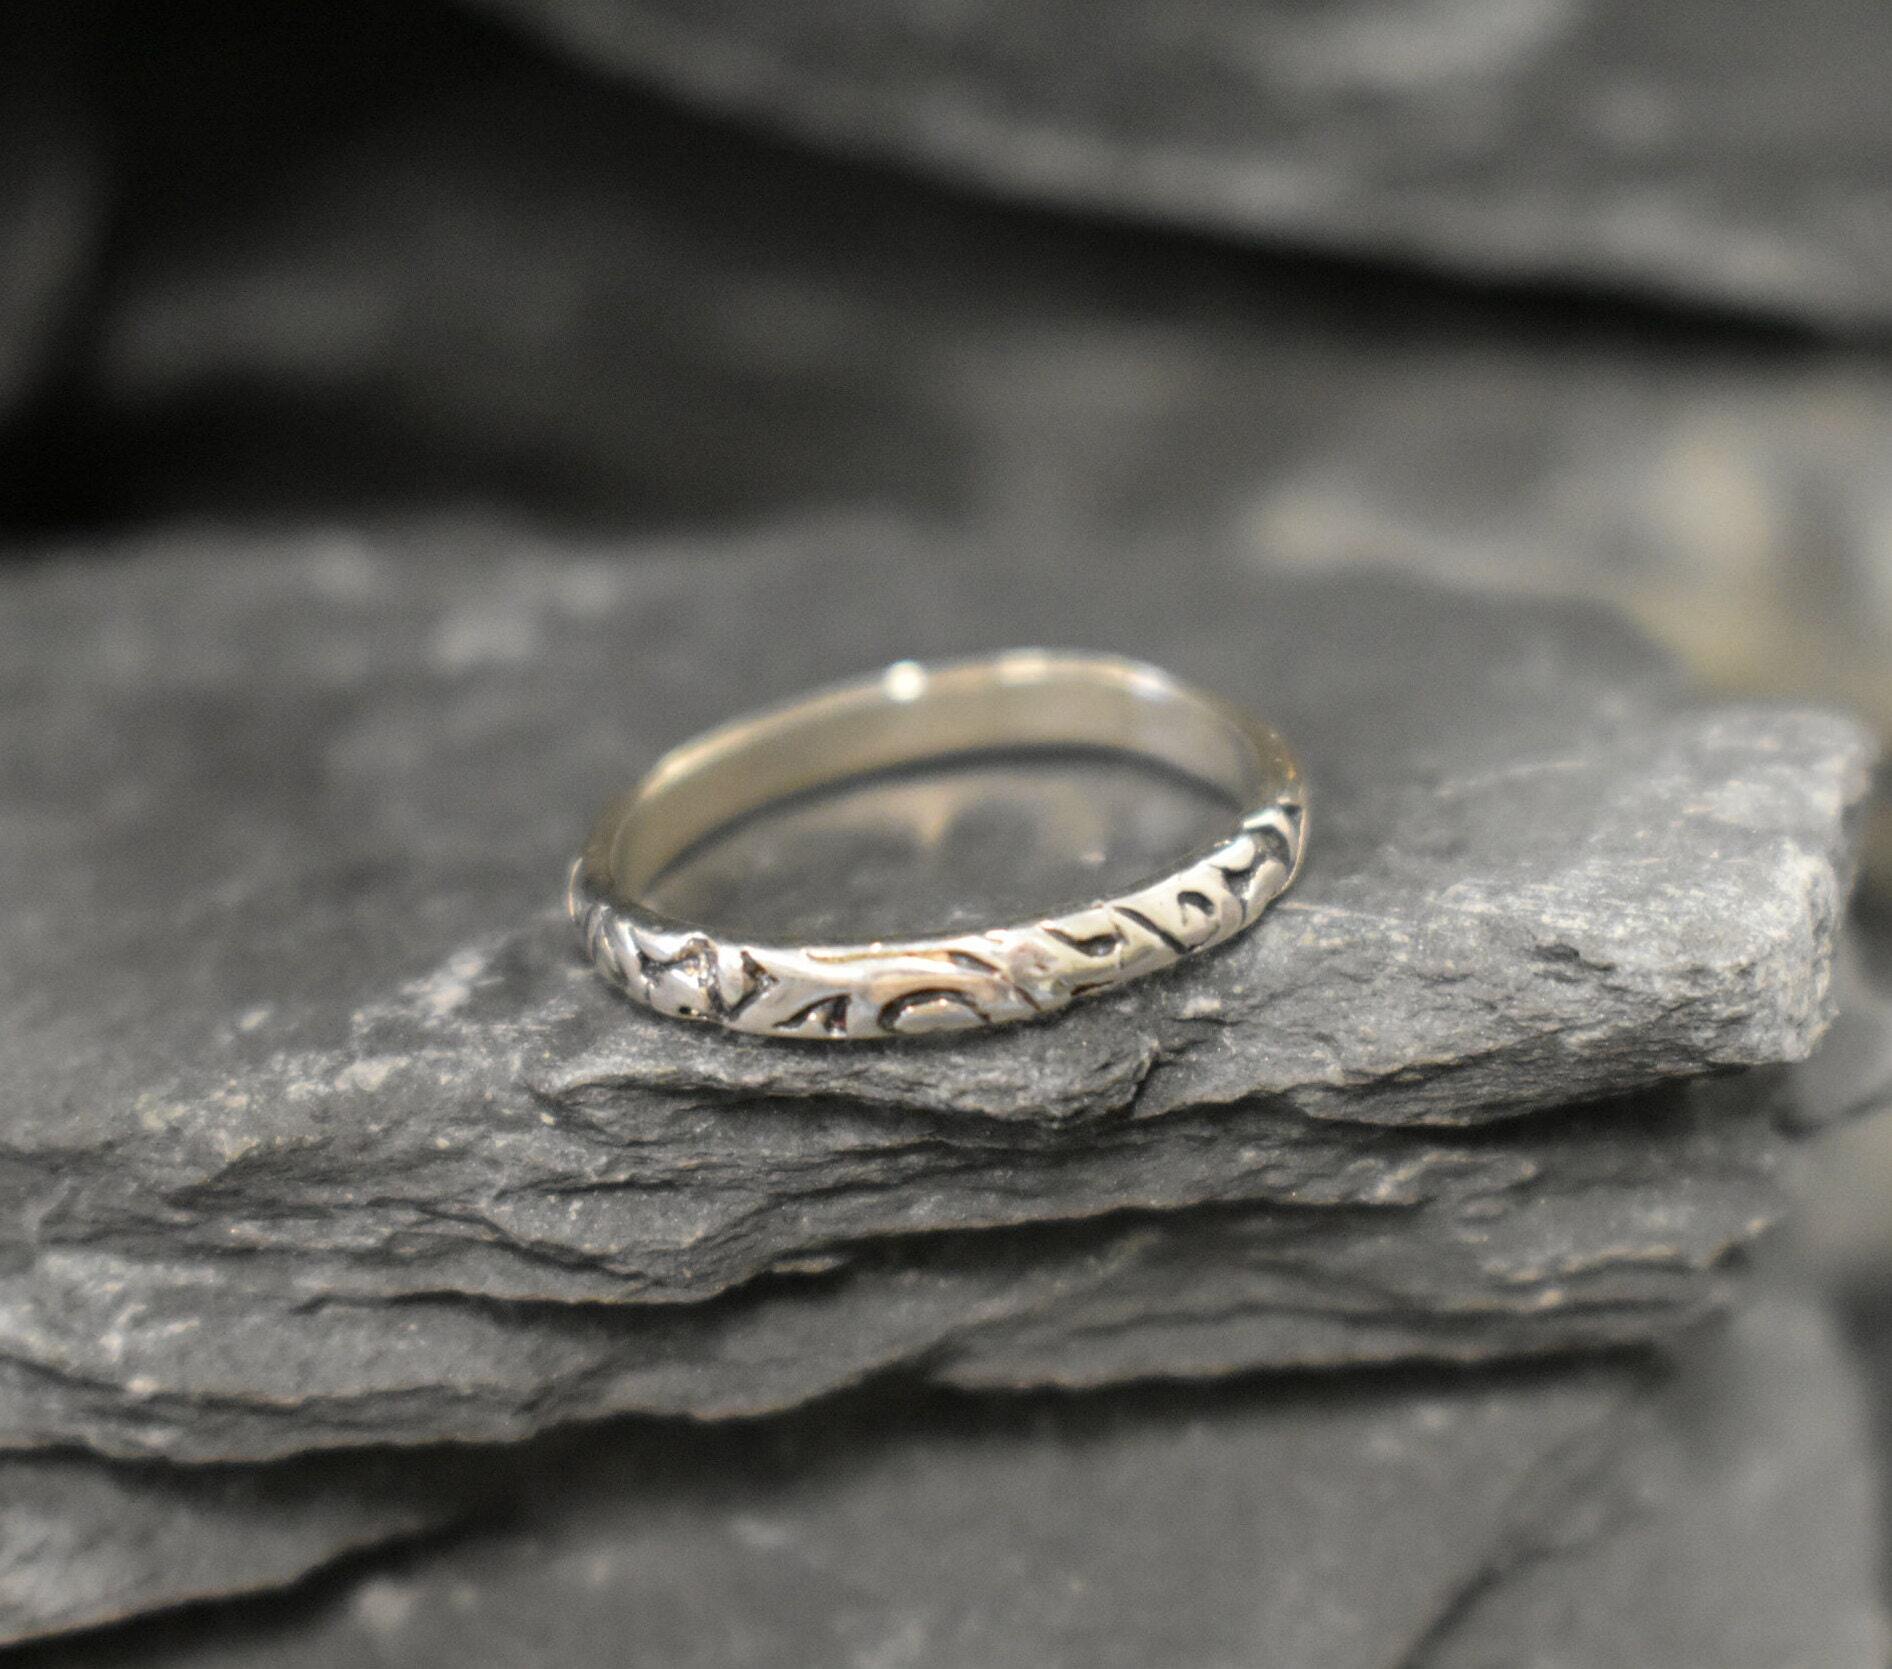 Silver Stackable Band, Tribal Band, Ornament Ring, Dainty Band, Stackable Band, Vintage Band, Stackable Ring, Thin Band, Solid Silver Ring